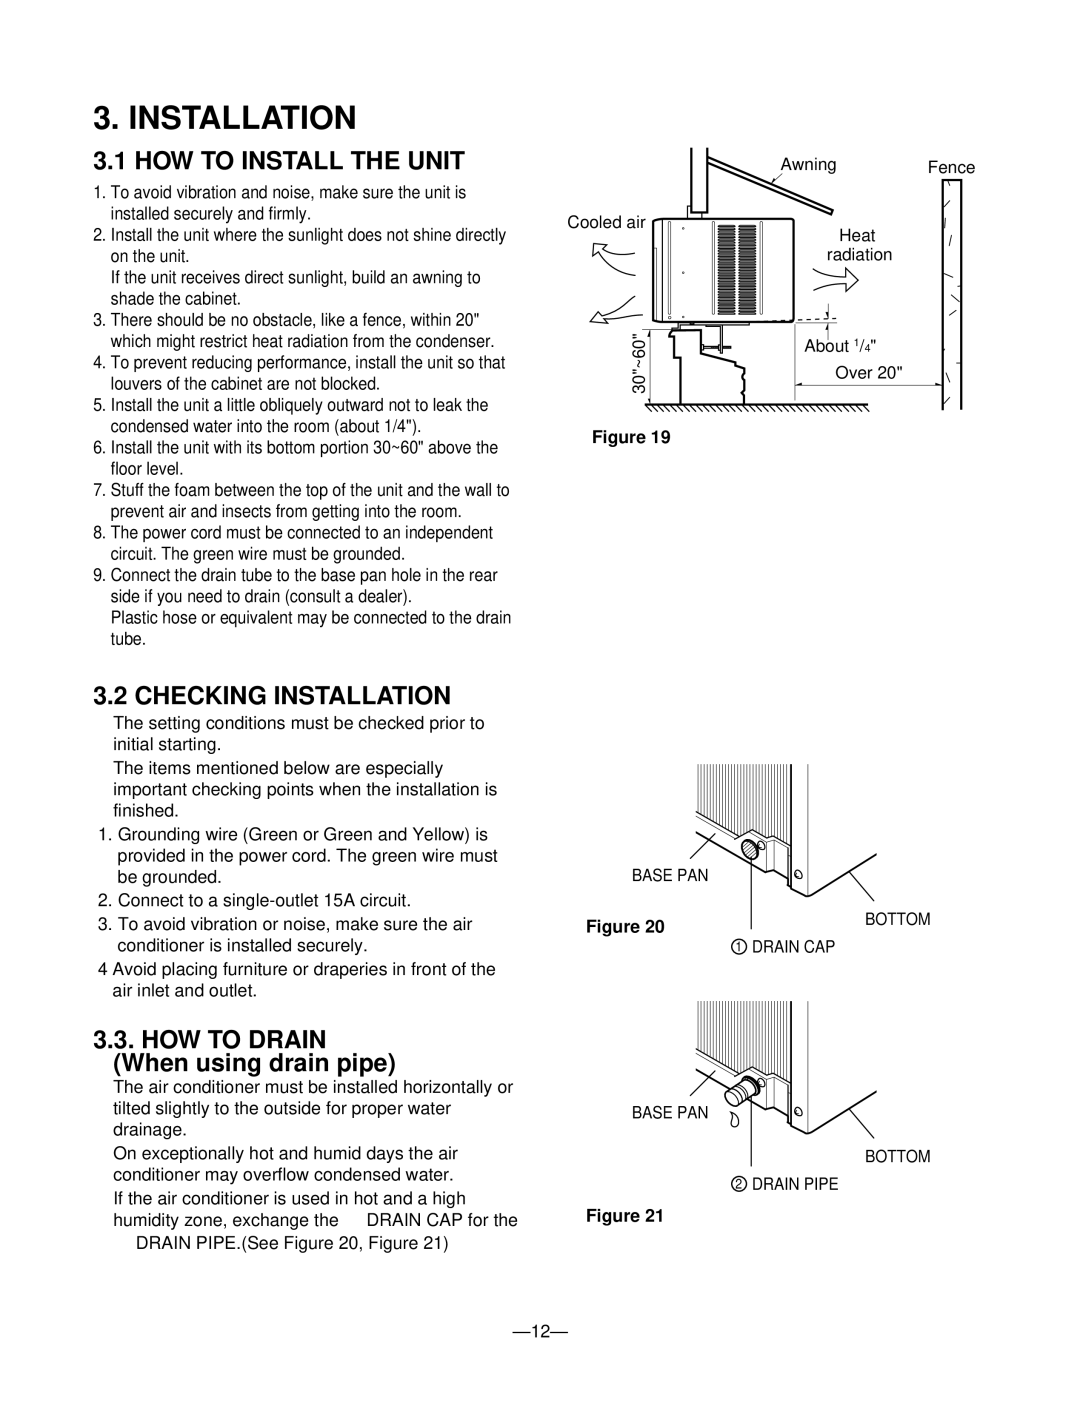 Friedrich SV12A10, SV10A10, SV08A10 manual HOW to Install the Unit, Checking Installation 